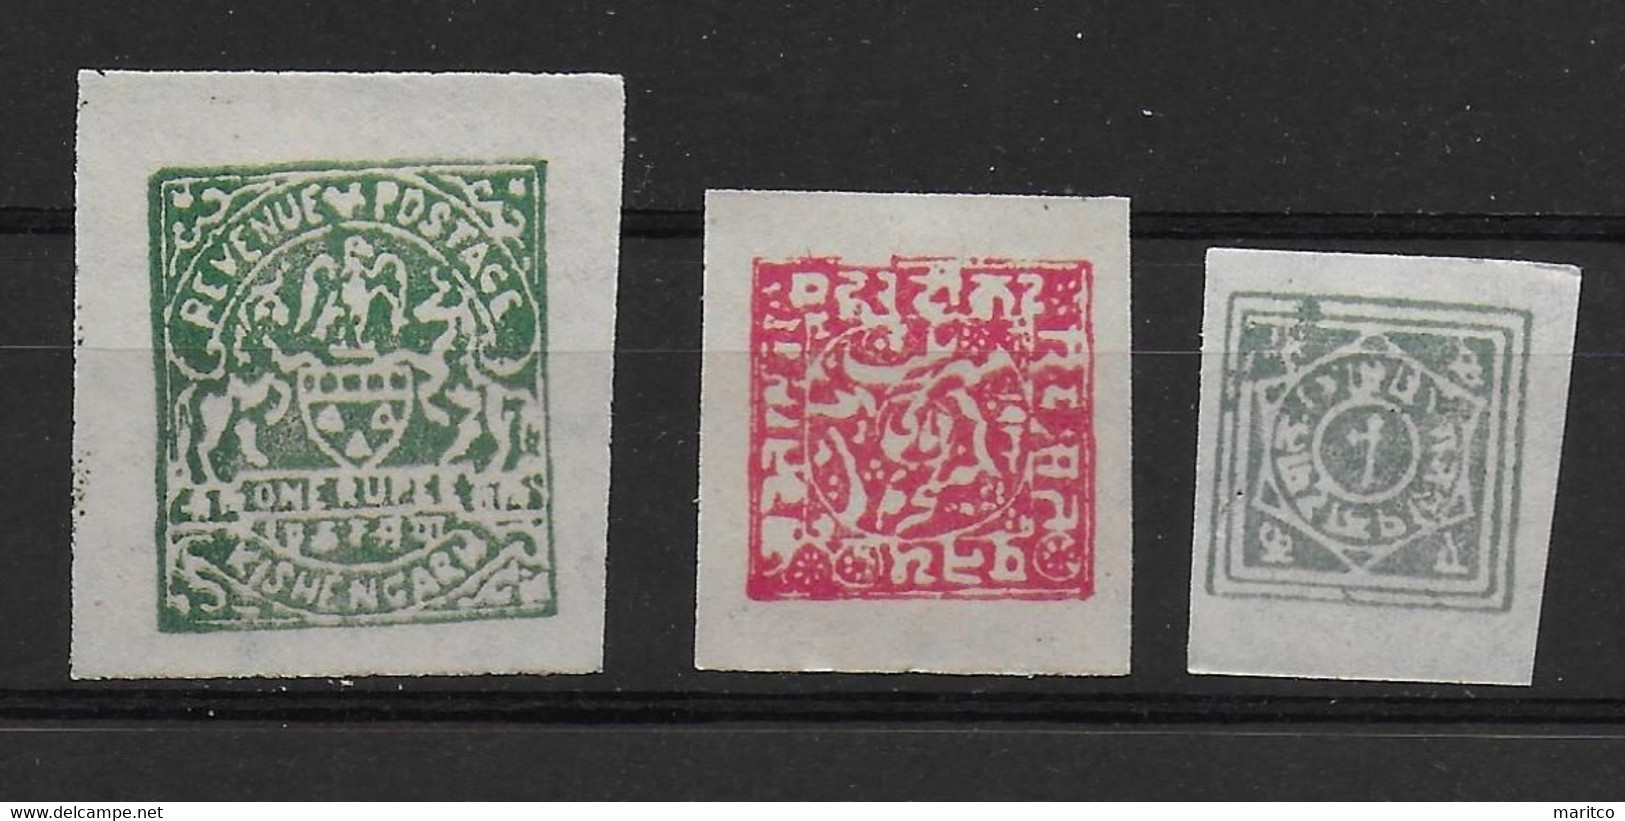 Unknown Stamp Local India States? Afghanistan? - Vignettes De Fantaisie